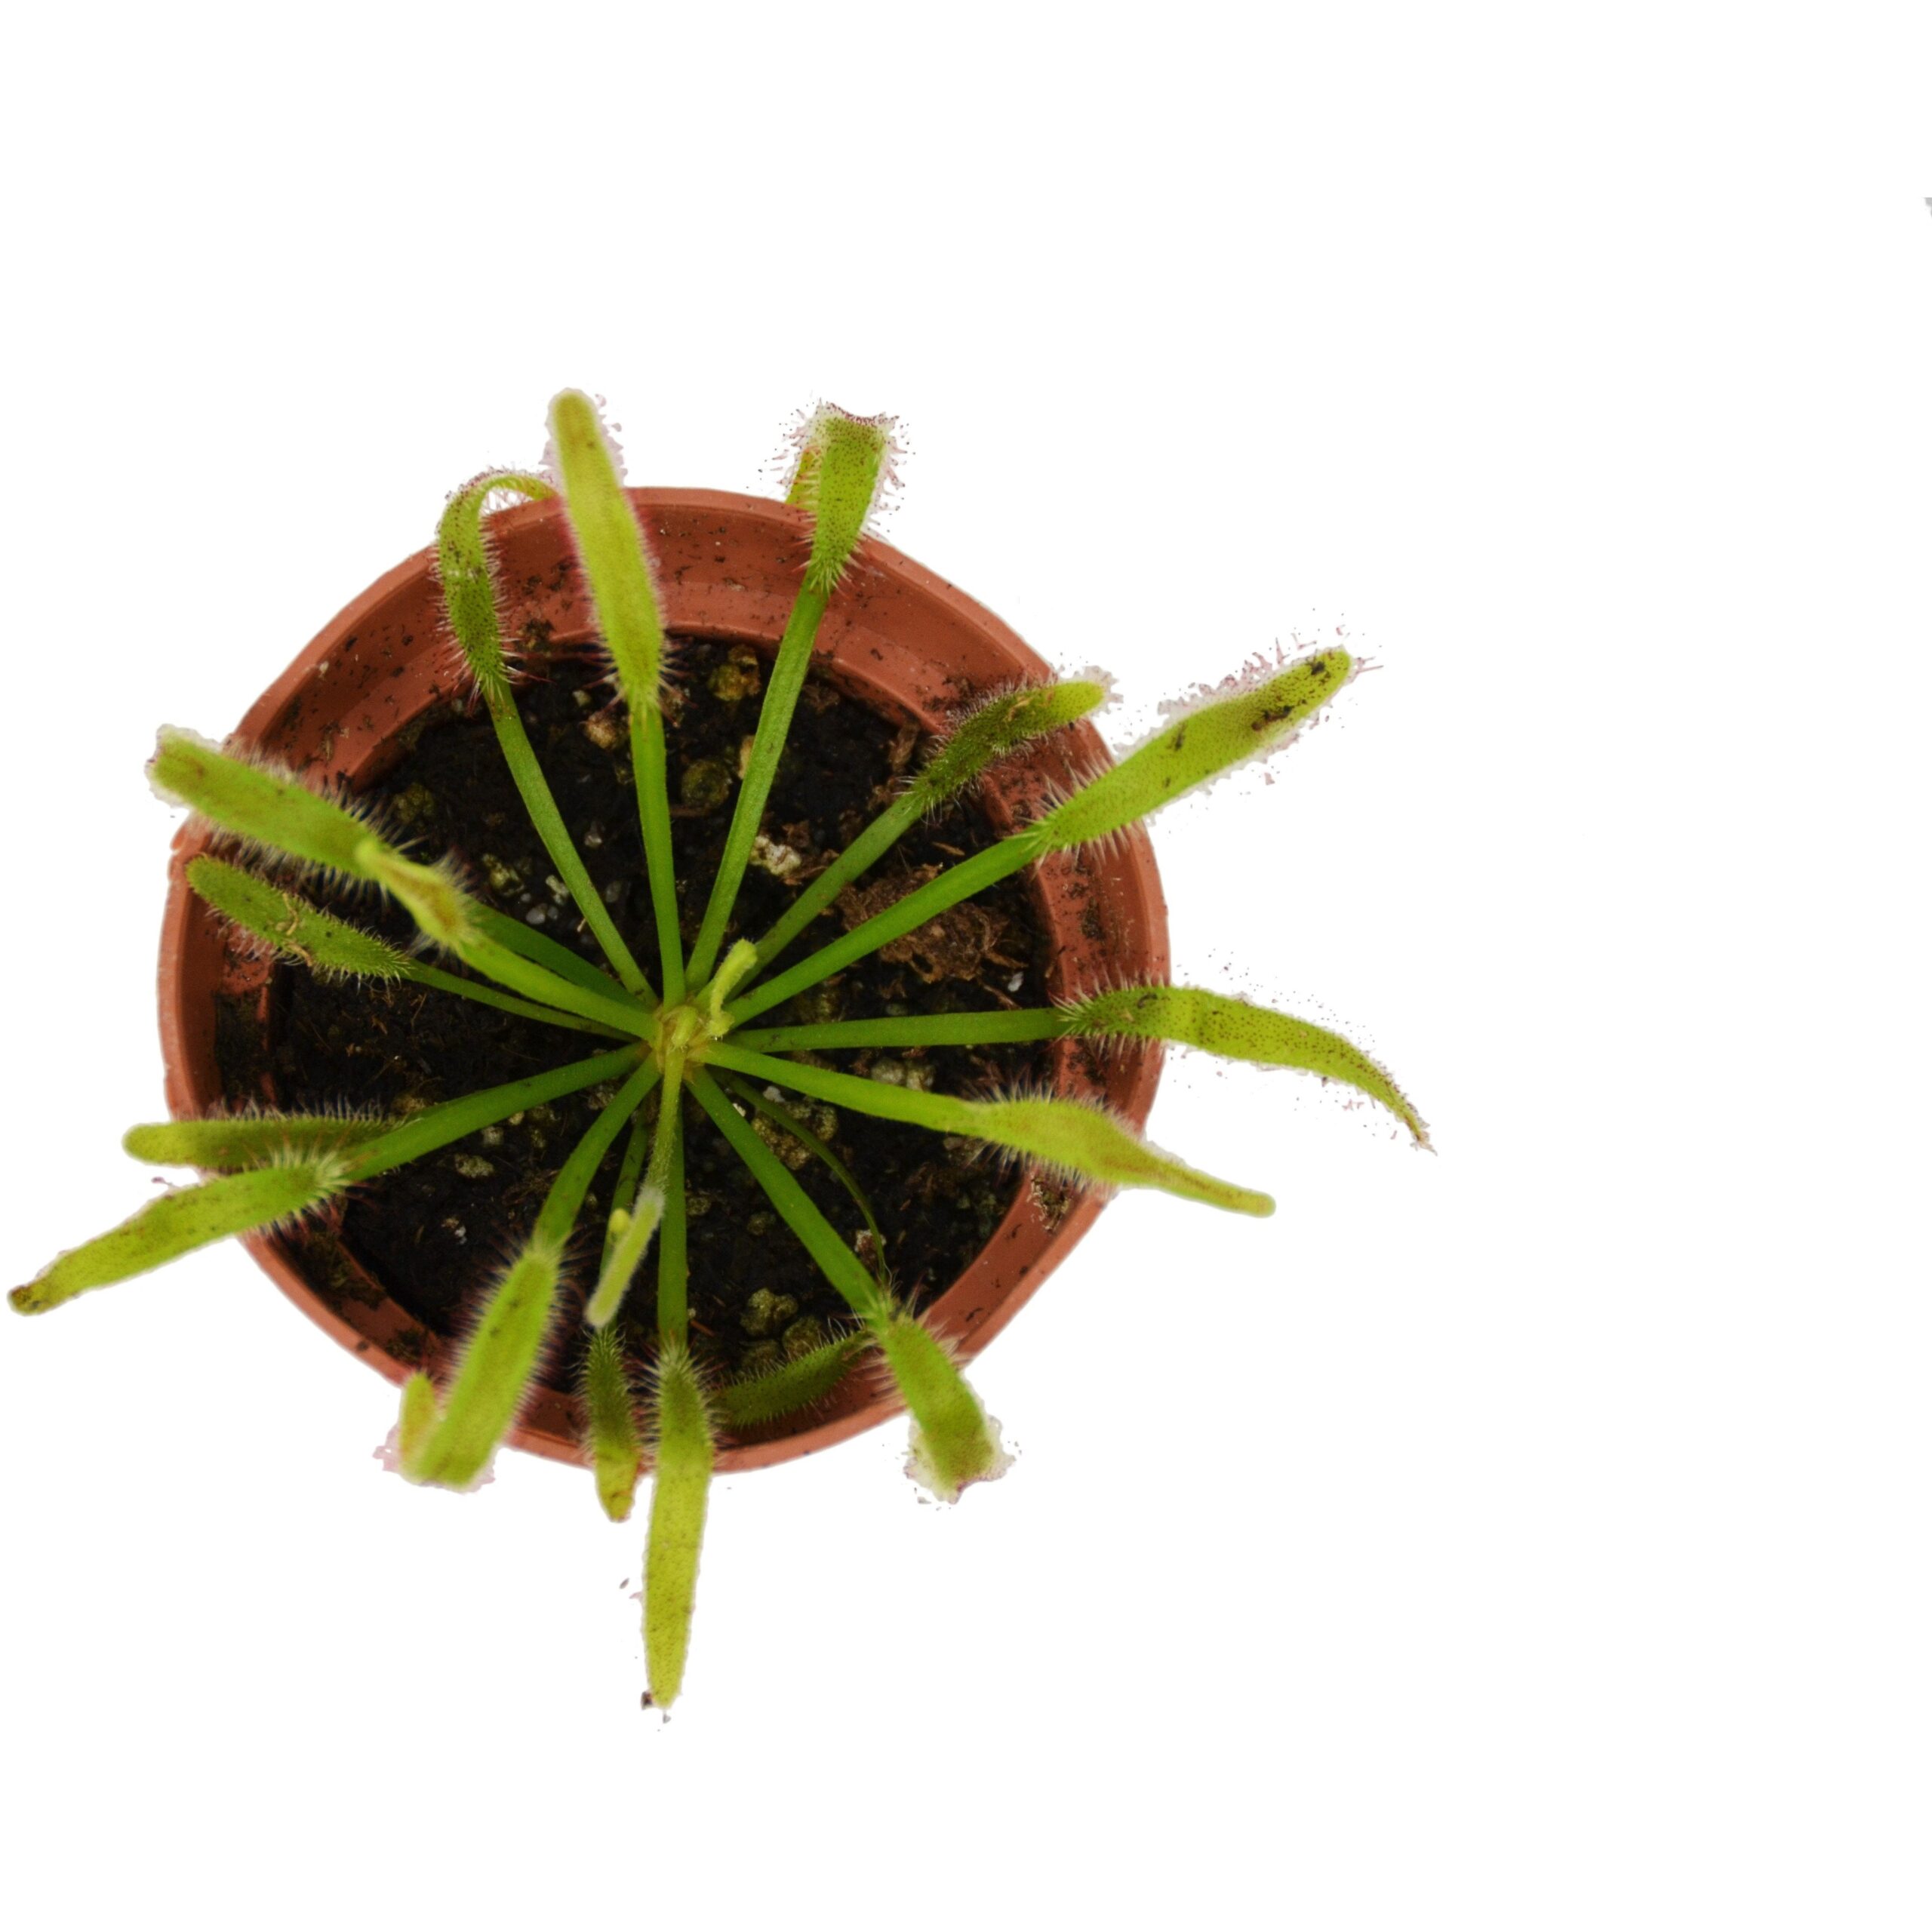 A small plant in a pot on a white background.